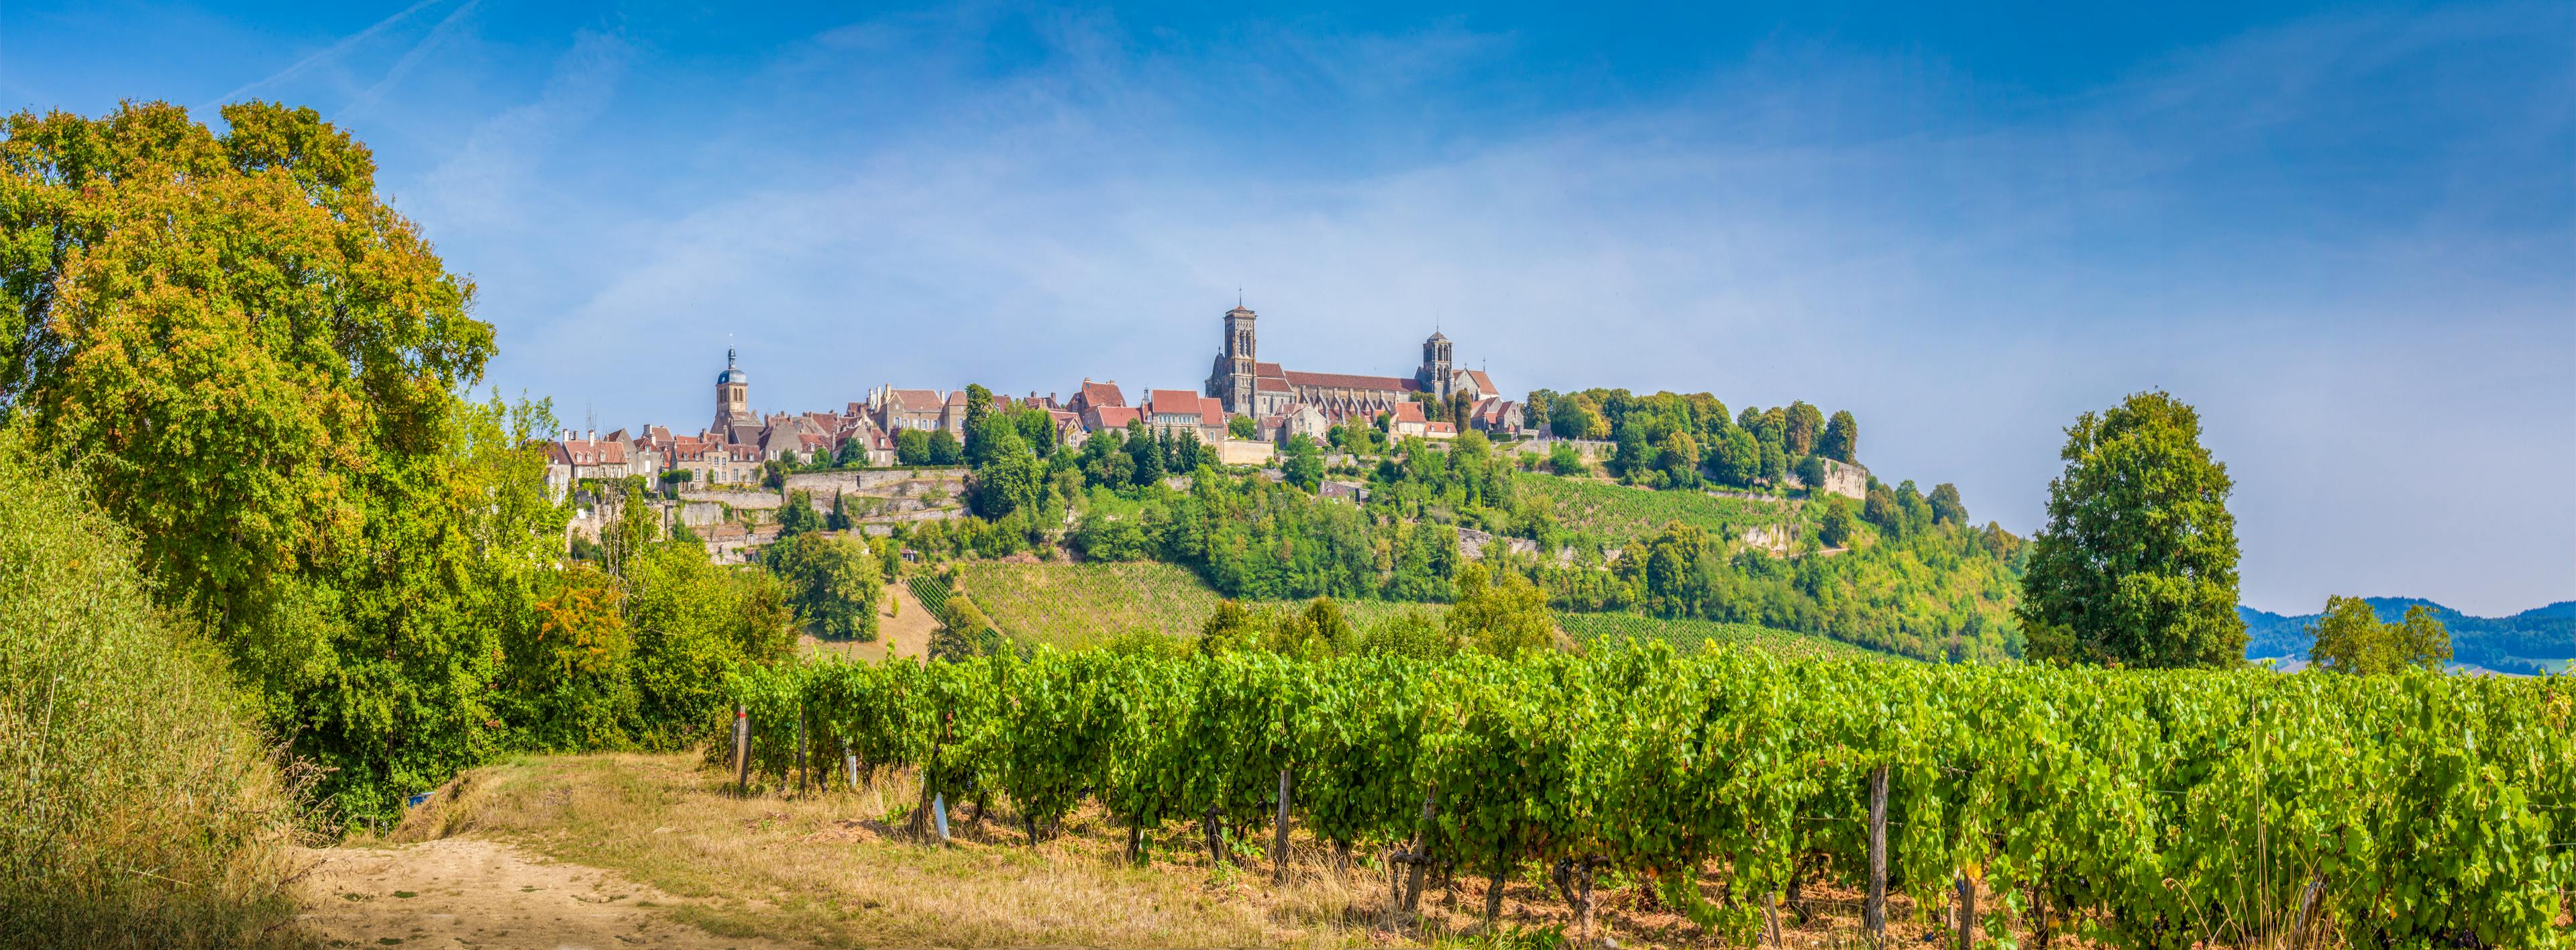 Panoramic view of the historic town of Vezelay with famous Abbaye Sainte-Marie-Madeleine de Vezelay), a UNESCO World Heritage site since 1979, on top of a hill, Yonne department, Burgundy, France.